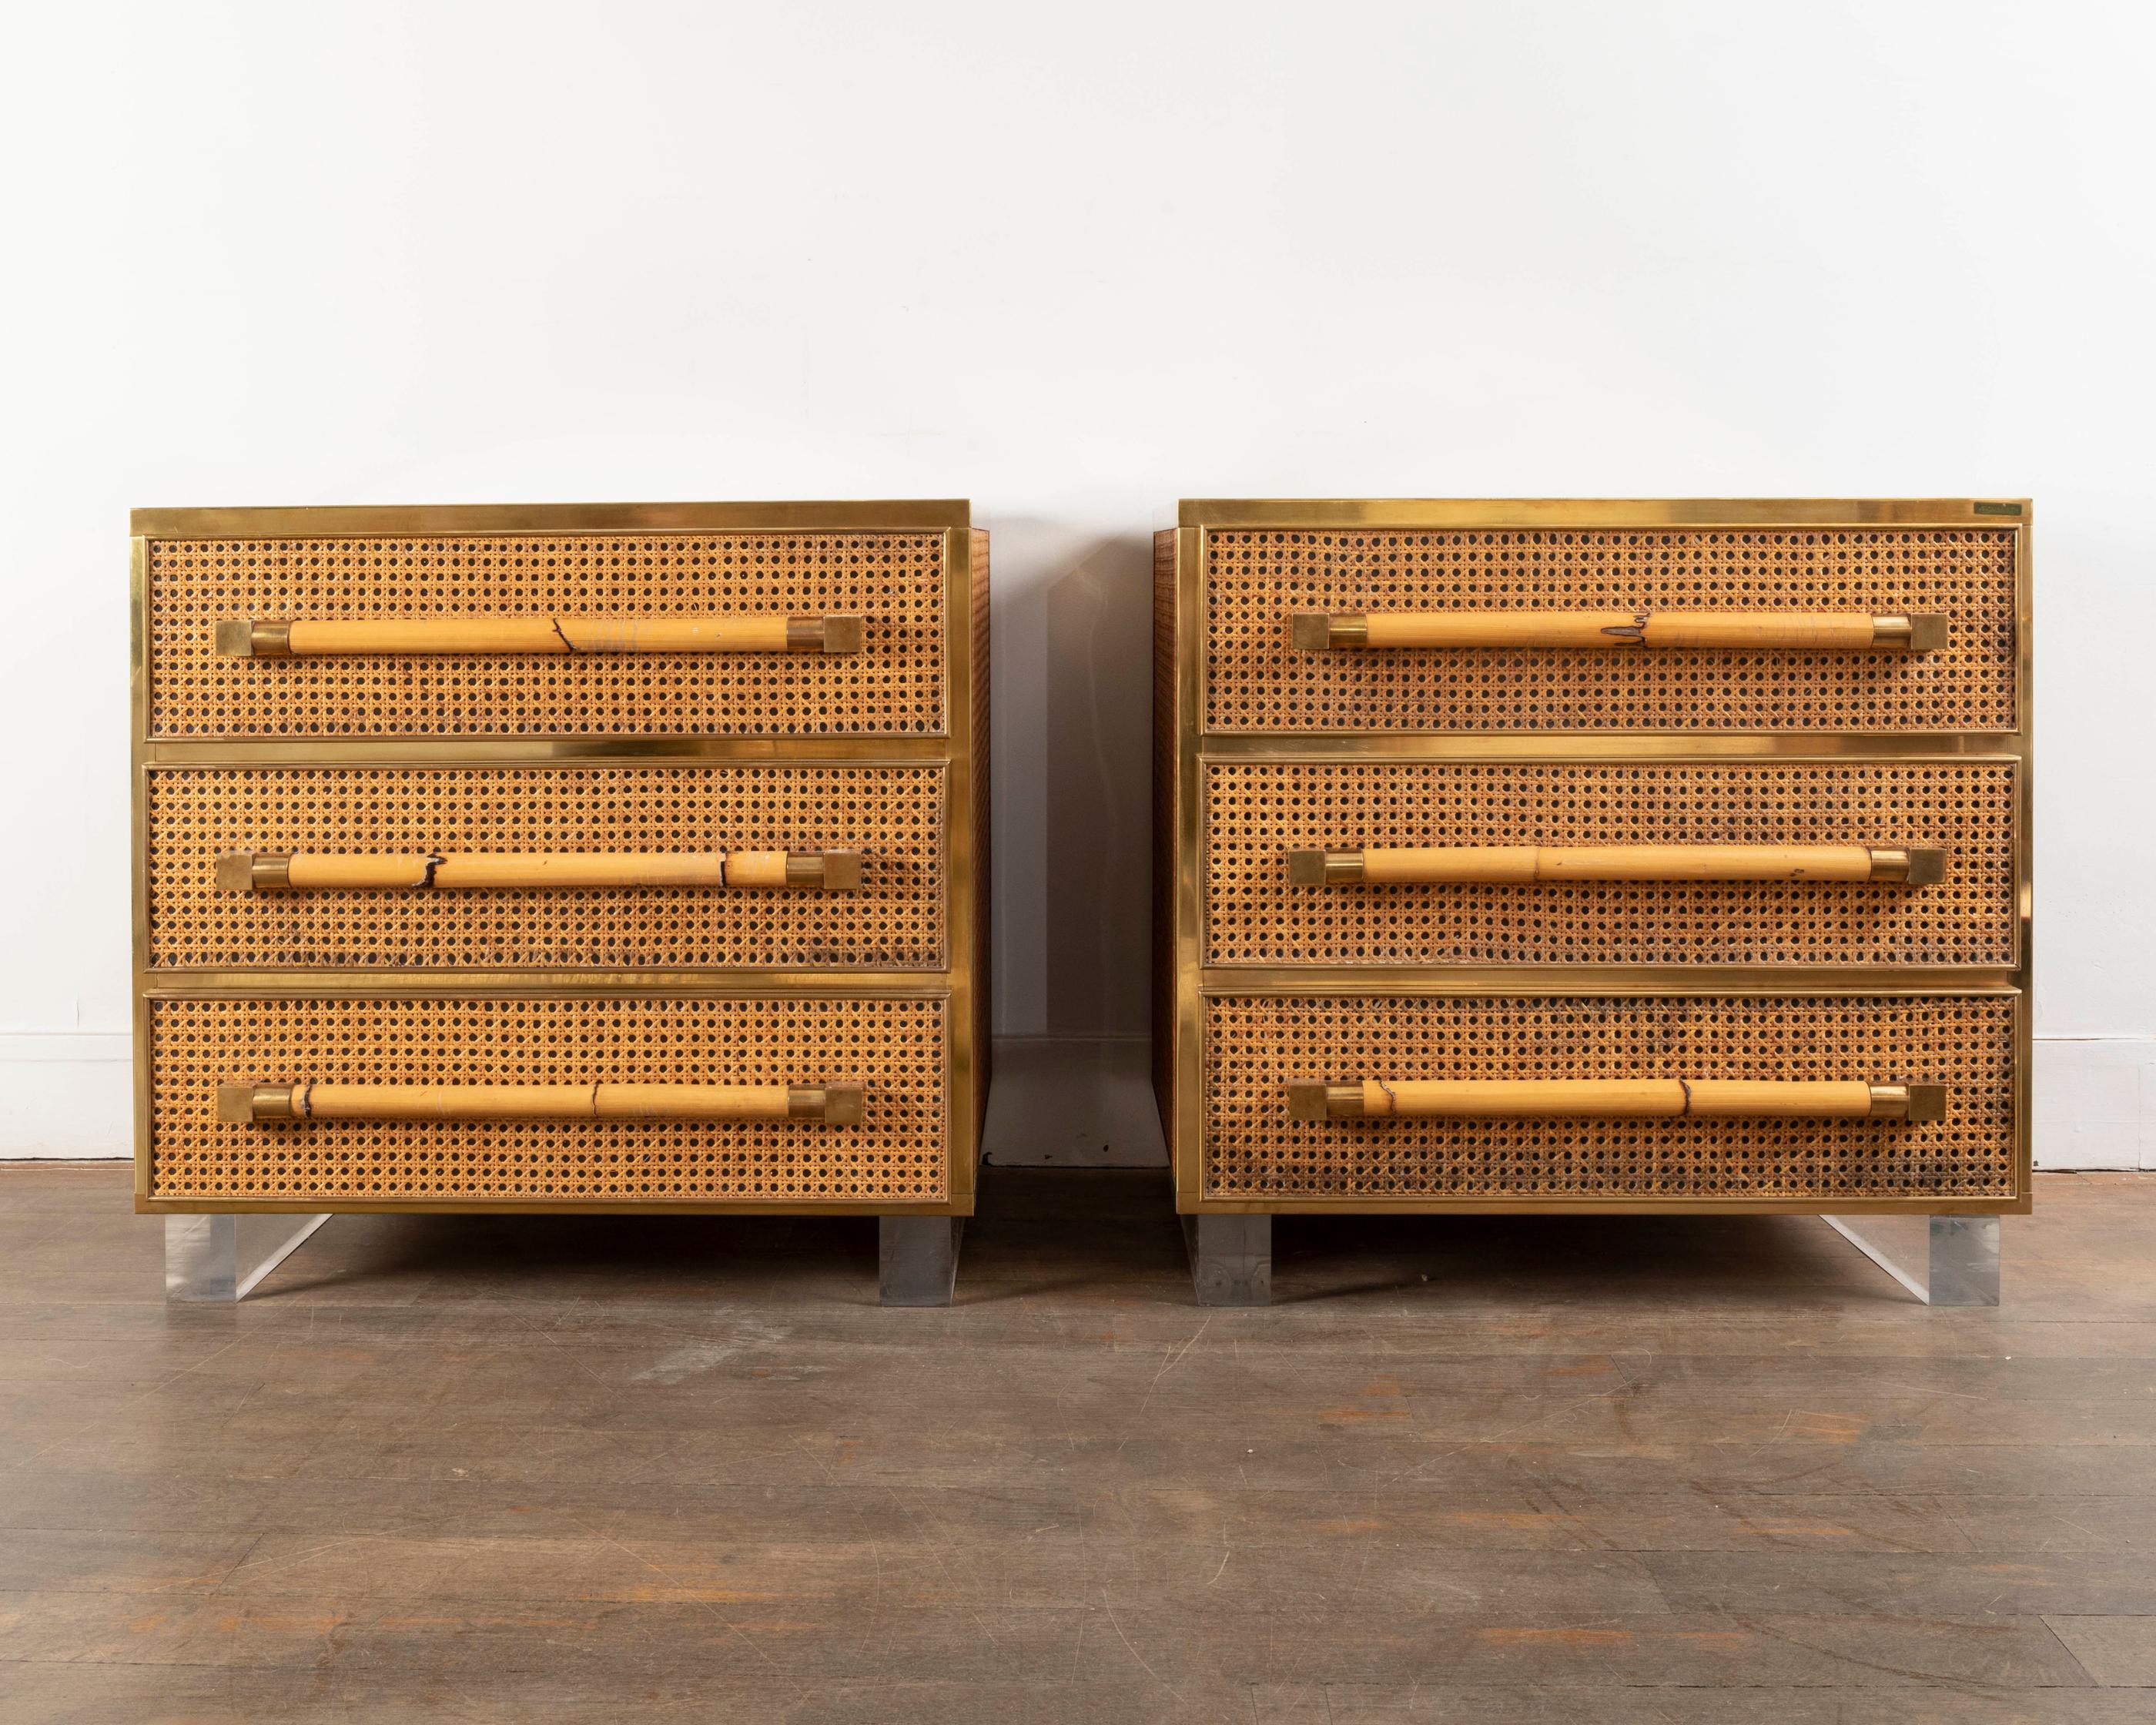 Pair of small commodes / large nightstands designed by Sandro Petti, manufactured by Metalarte.
3 drawers; caned sides and drawers with brass framing, mirrored tops, acrylic bases
signed Sando Petti,
Italy, 1970s.